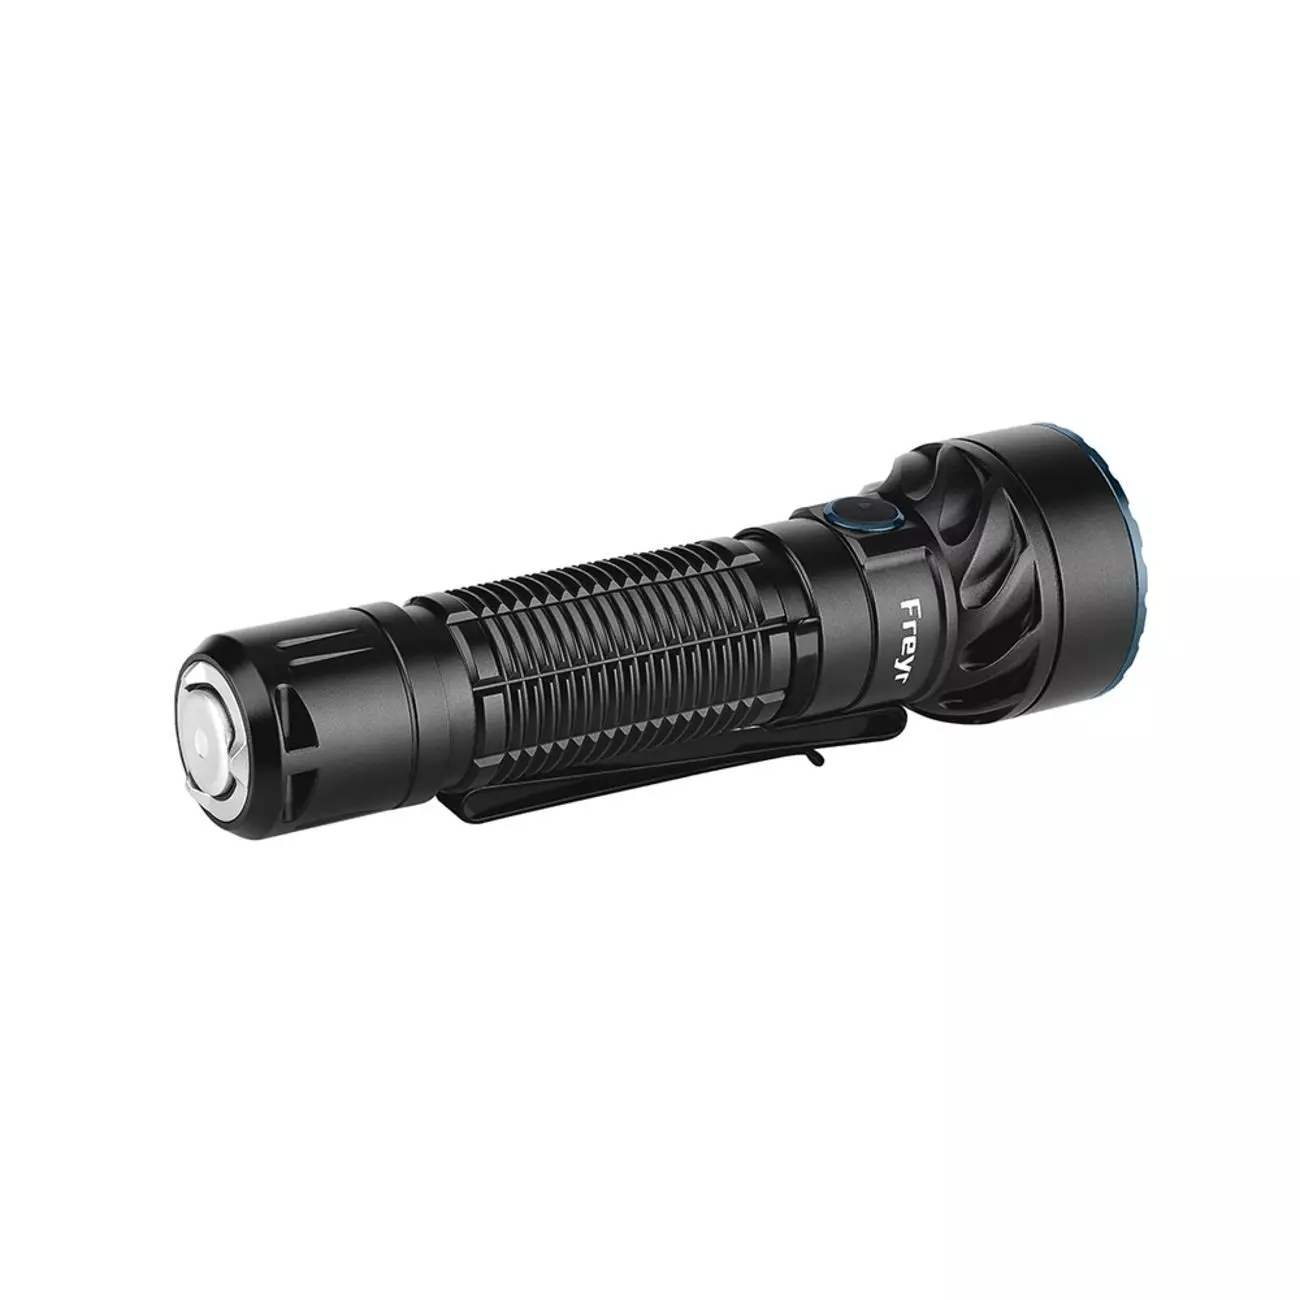 Lampe torche rechargeable - 800 lumens - Corderie Weiss